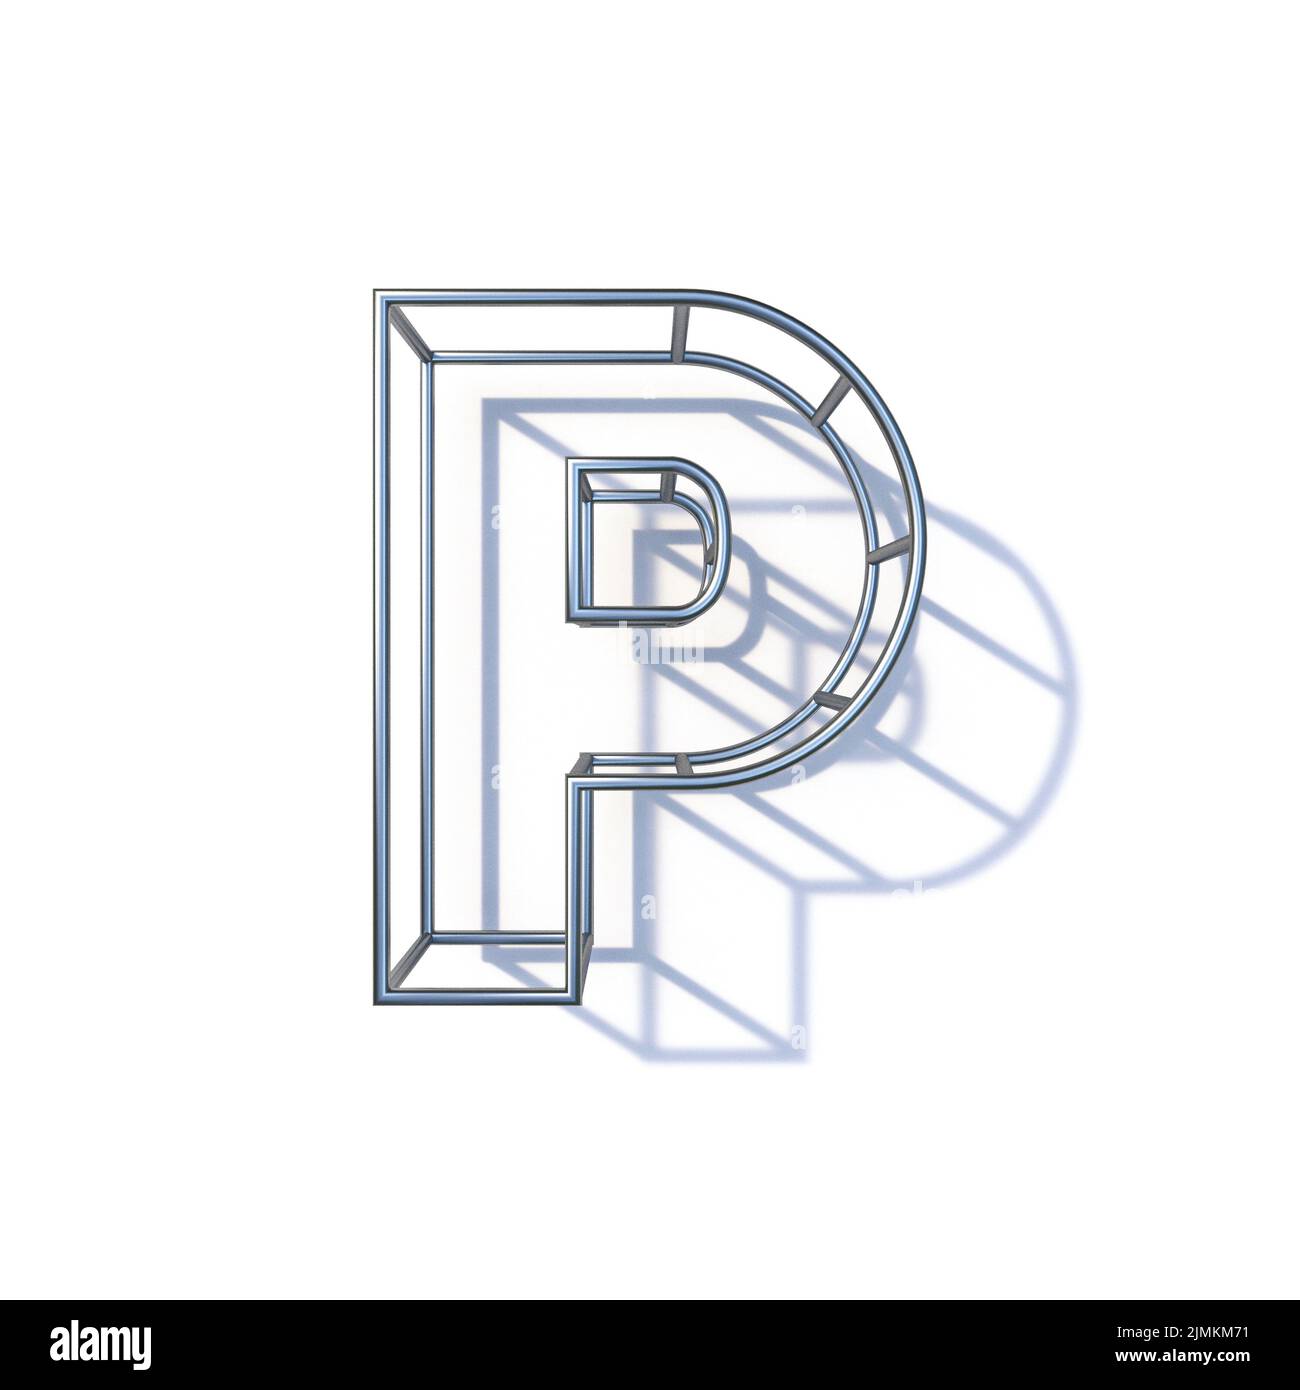 Steel wire frame font Letter P 3D Stock Photo